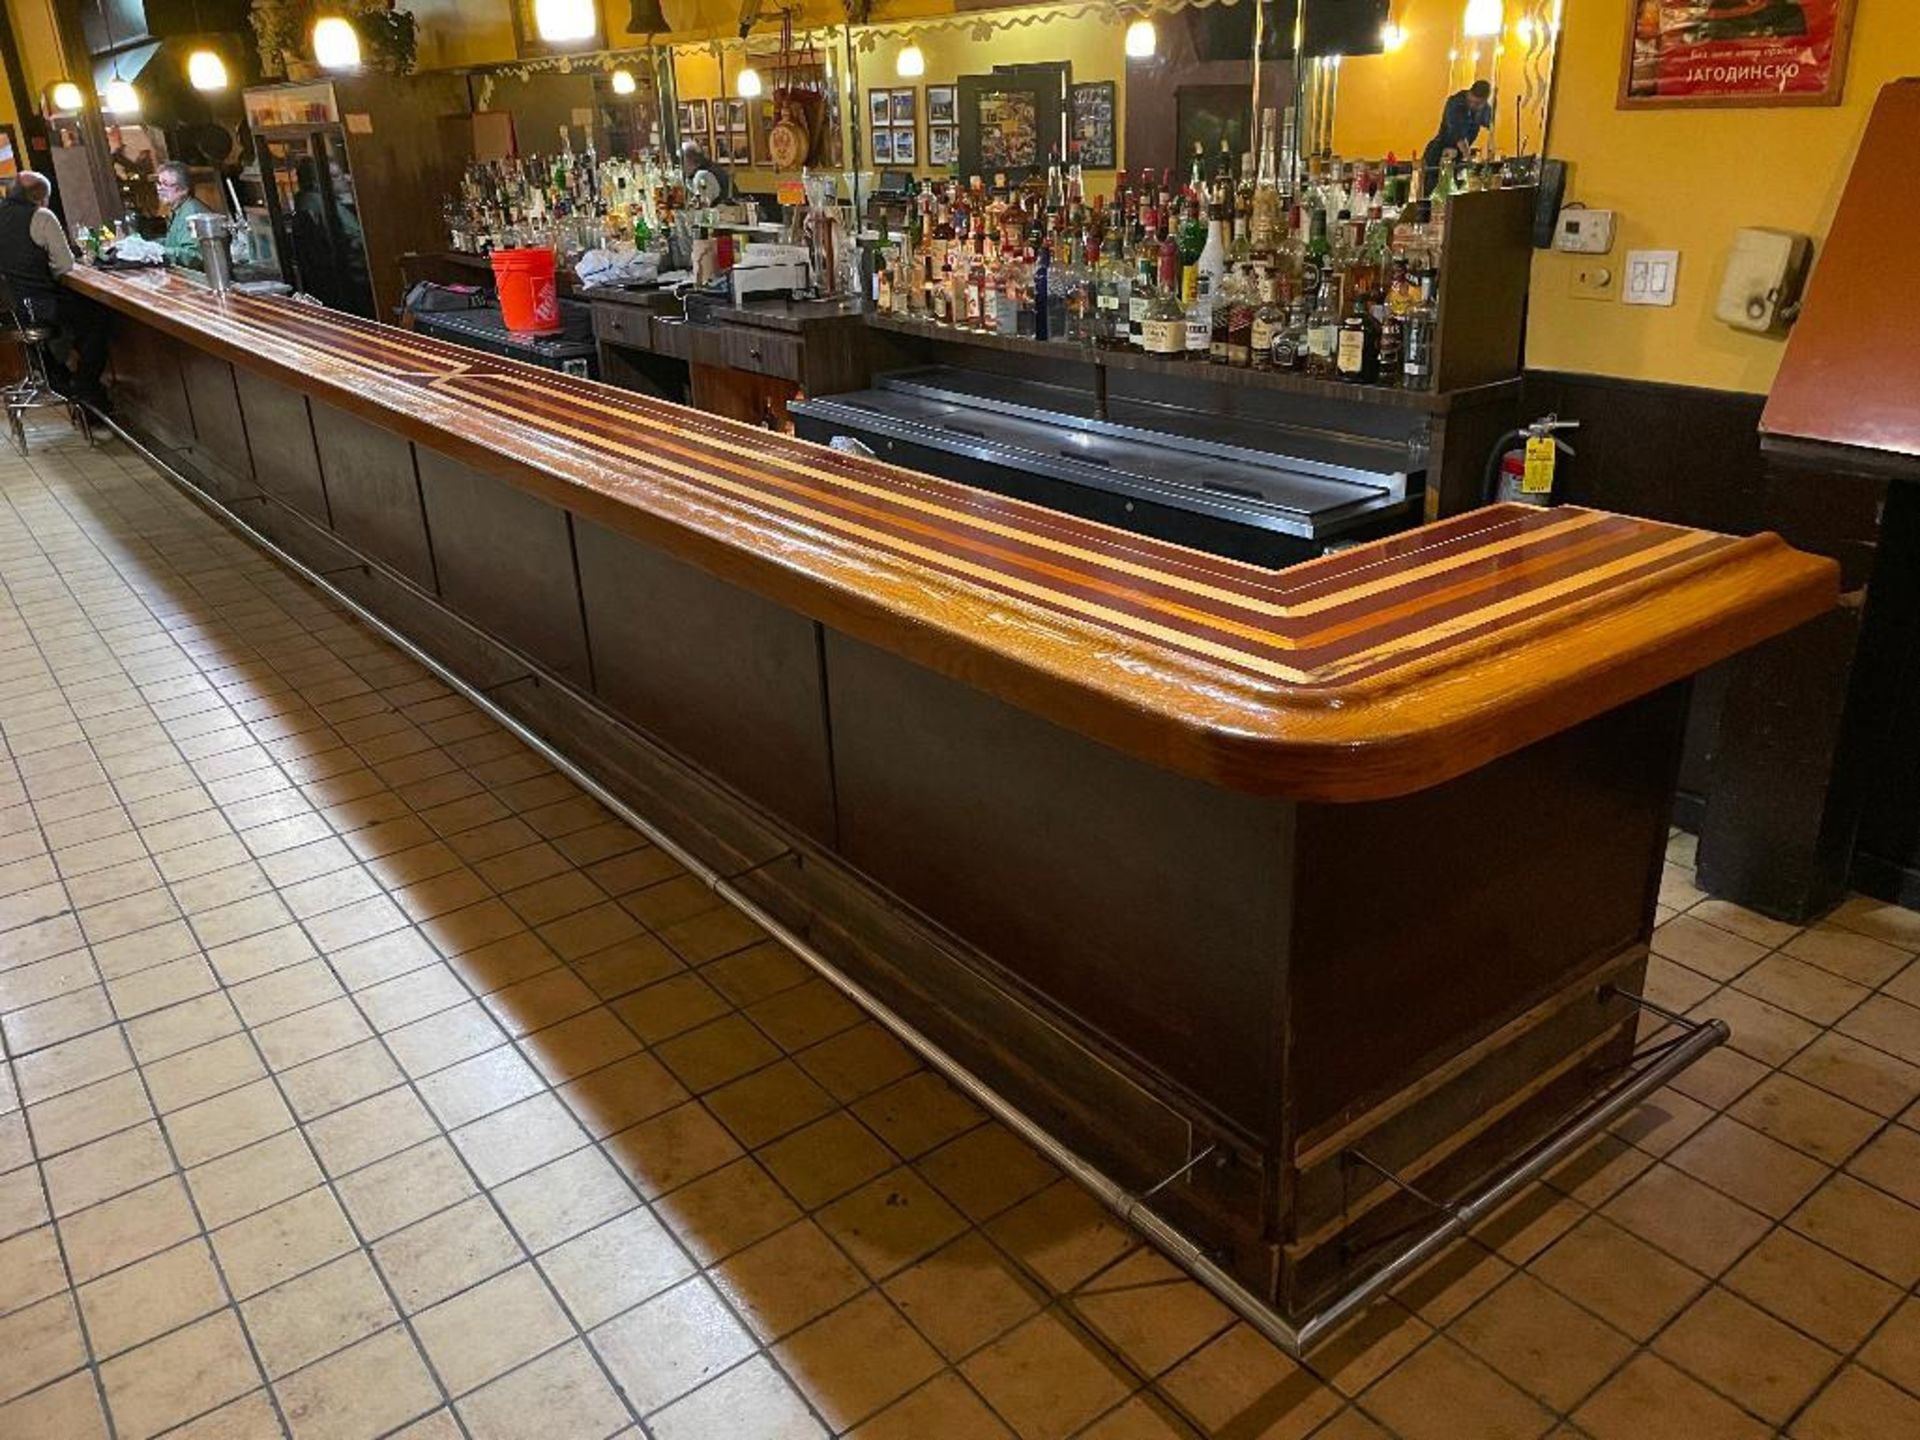 DESCRIPTION: 36' X 24" L SHAPED HARDWOOD BAR TOP W/ FOOT RAIL. ADDITIONAL INFORMATION TAP HEADS ARE